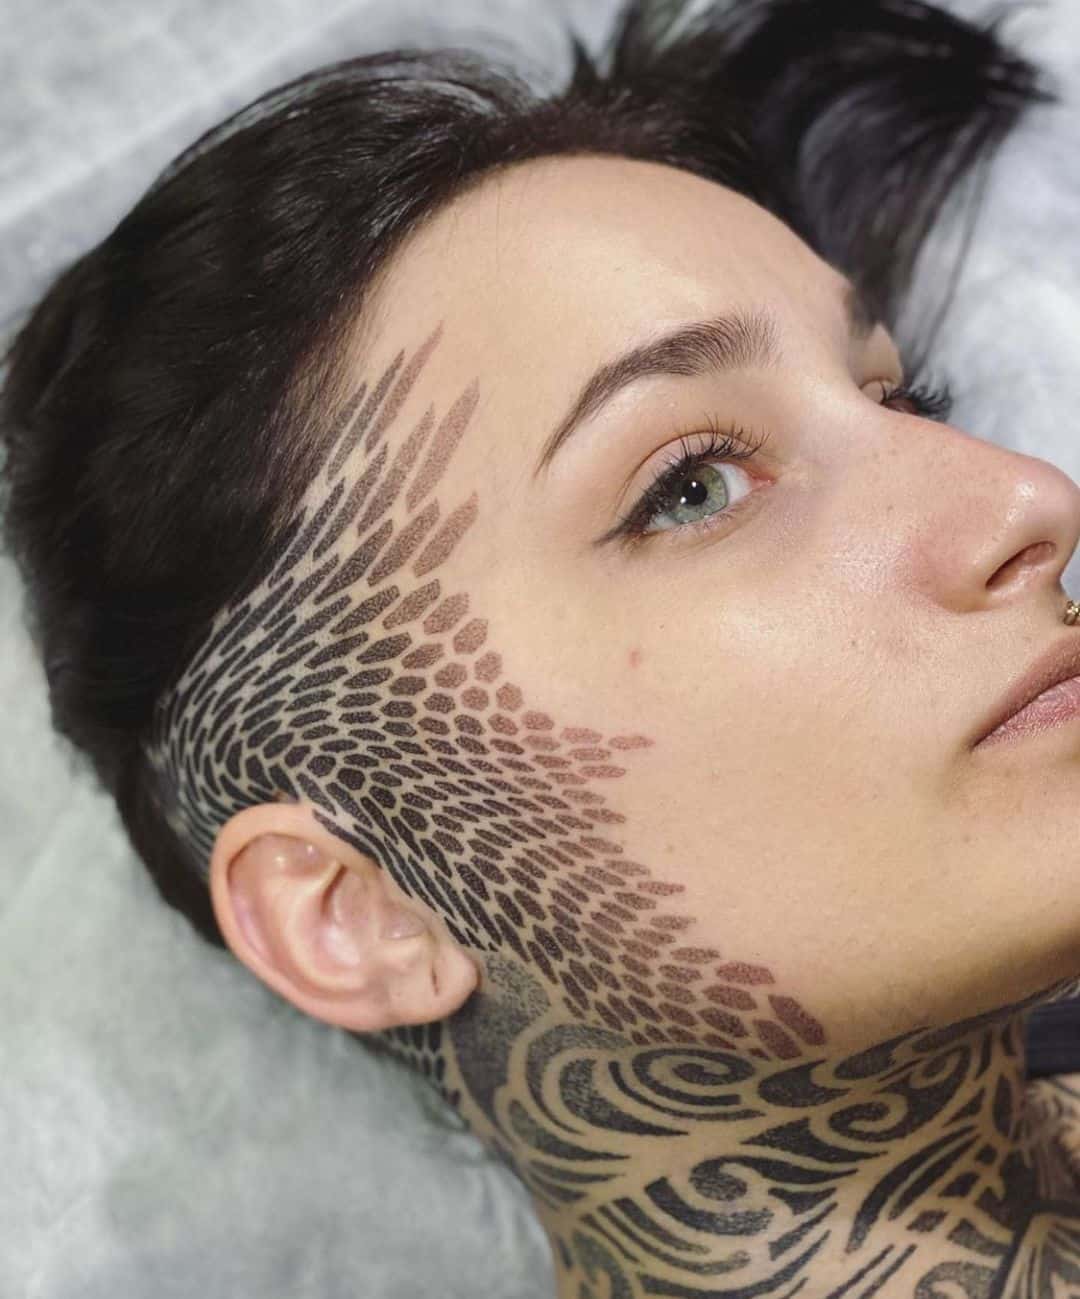 Blink and you won't miss it: Face tattoos go mainstream | The Seattle Times